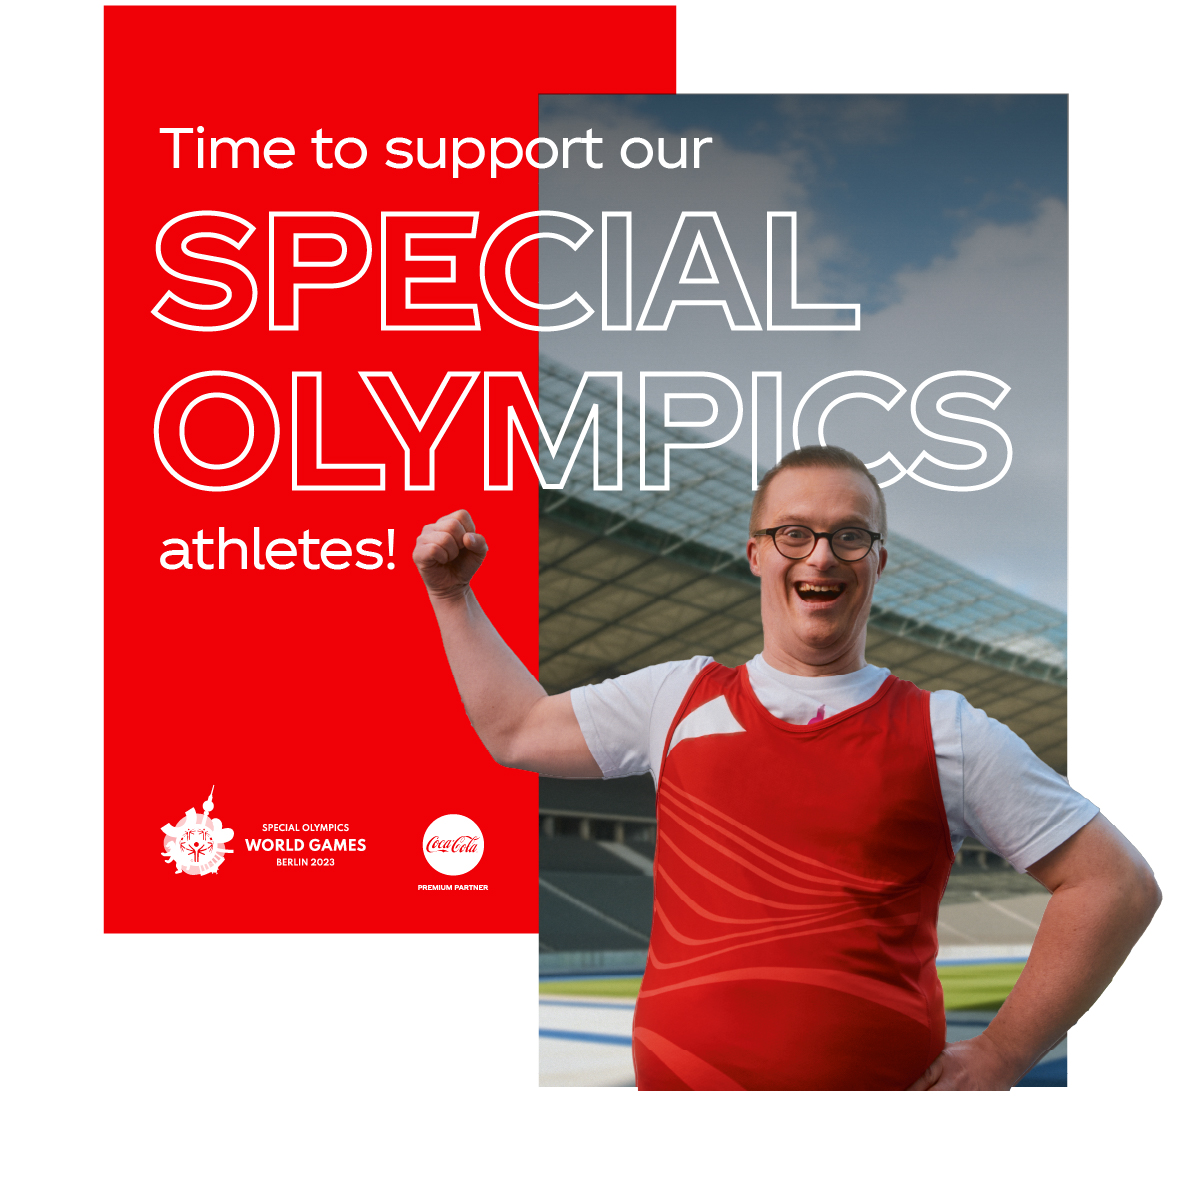 Wishing all athletes from all over the globe the best of luck as the @SpecialOlympics kick off in Berlin. Coca-Cola is once again a proud global sponsor of the world’s largest inclusive sporting event. Find out more here: CokeURL.com/zgxz52